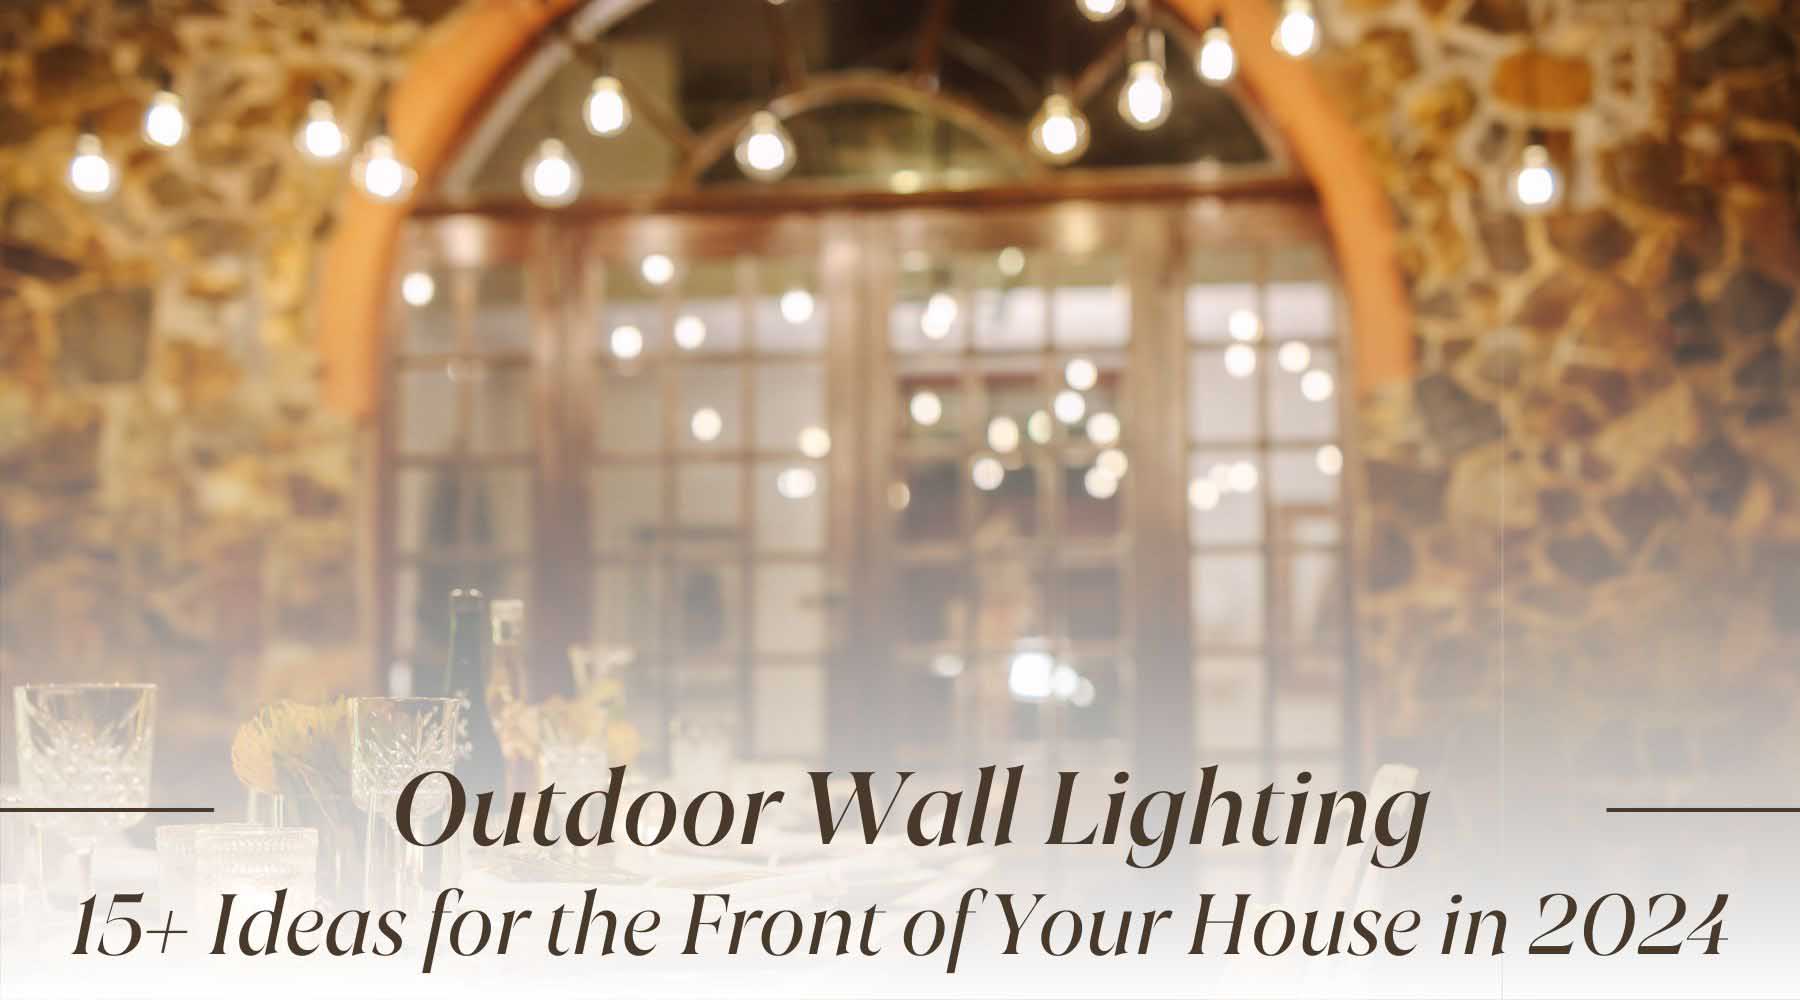 15+ Outdoor Wall Lighting Ideas for the Front of Your House in 2024